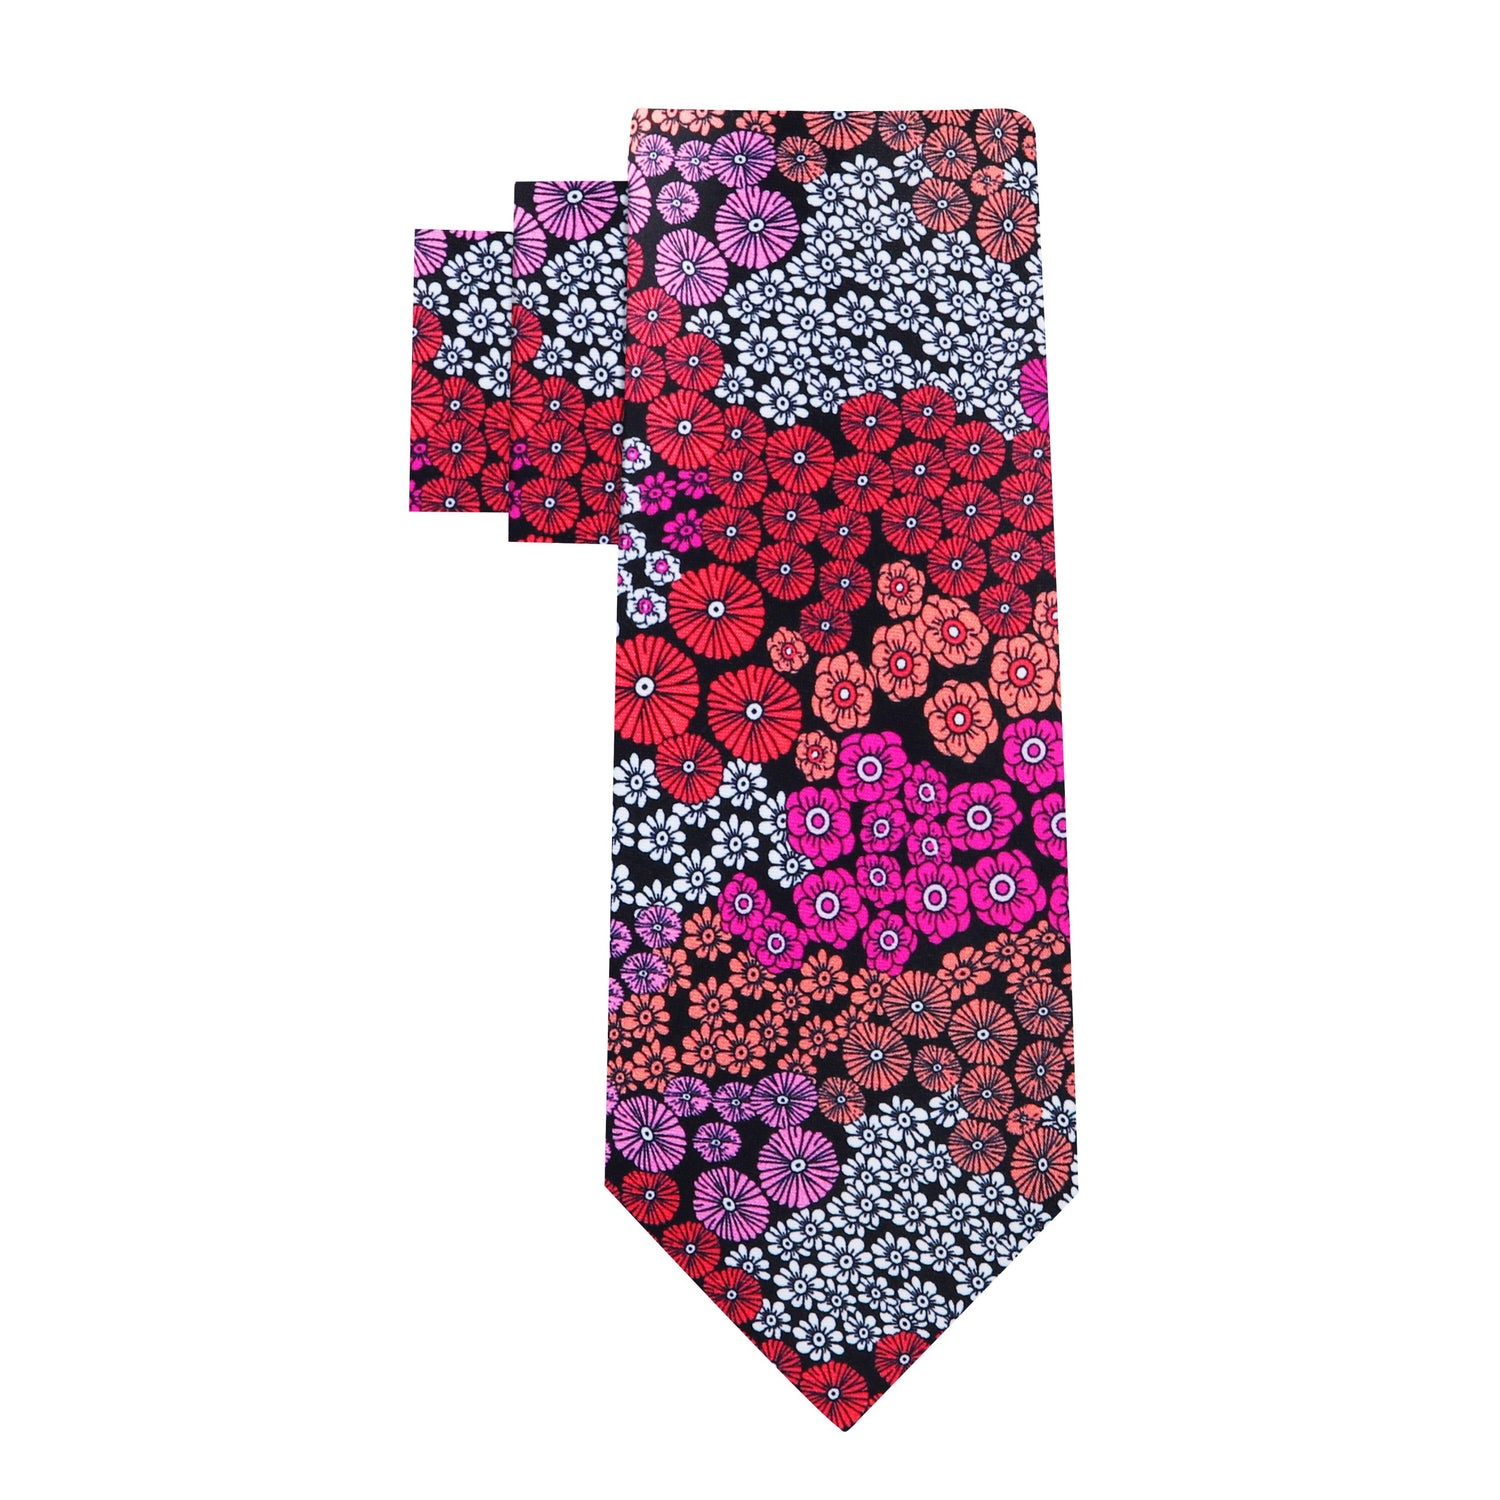 Alt View: Red Pink Orange and White Mixed Flowers Tie